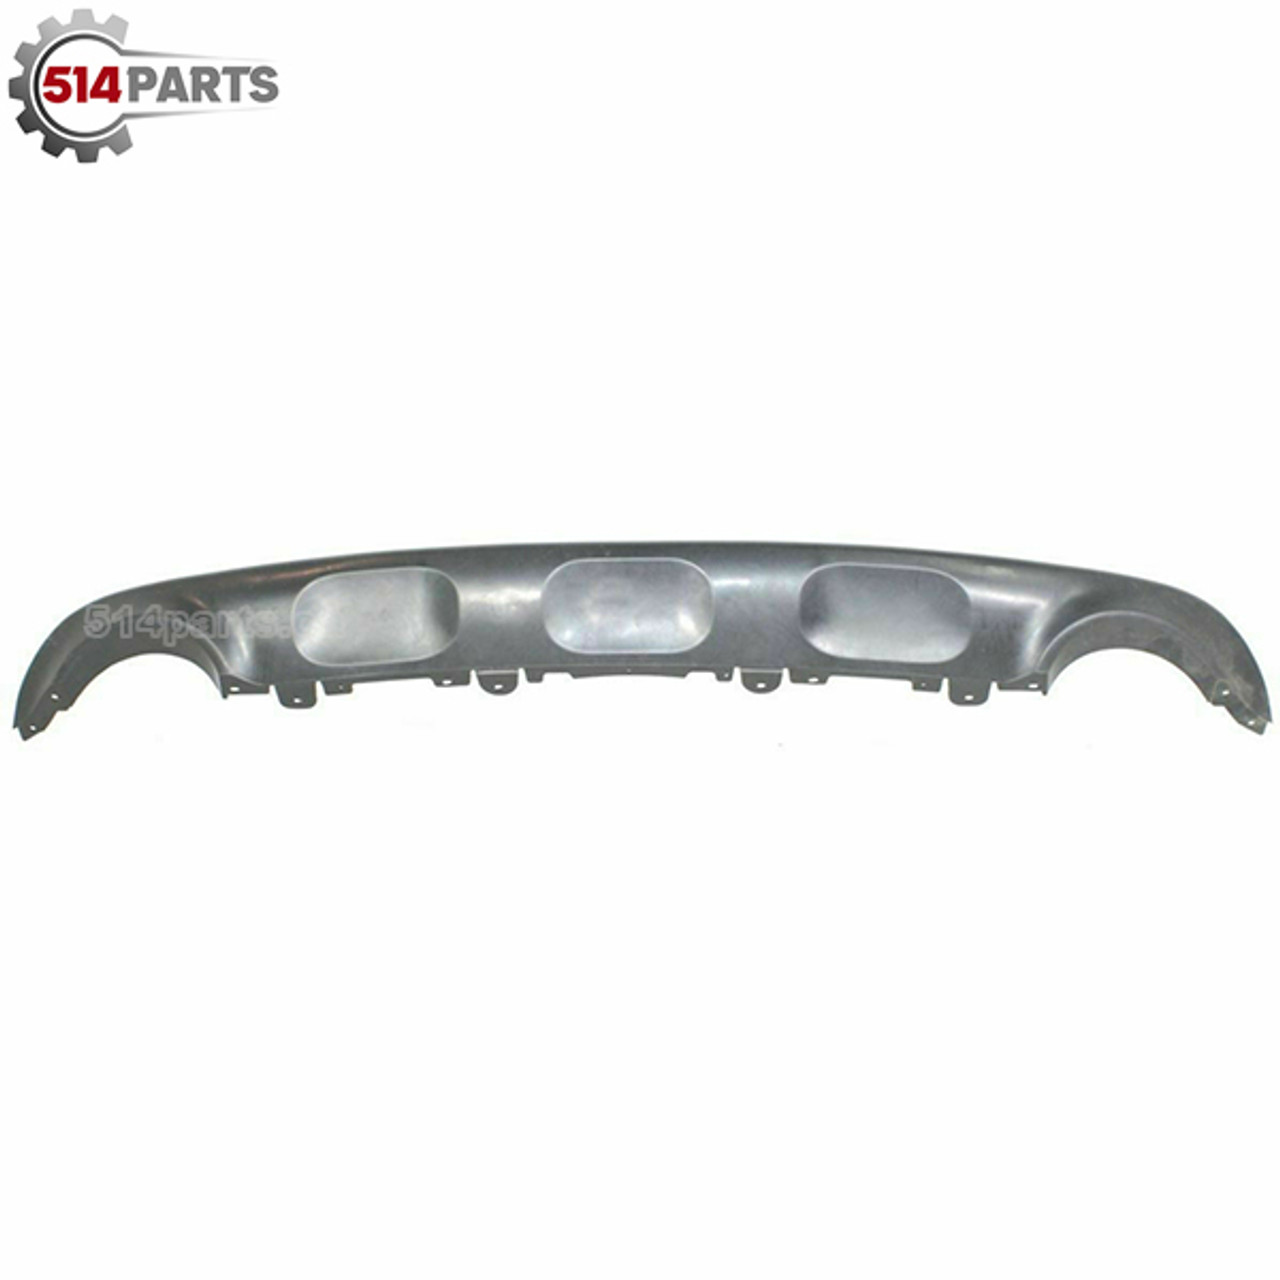 2007 - 2009 HYUNDAI SANTA FE REAR LOWER BUMPER COVER SMOOTH FINISH - PARE-CHOC ARRIERE INFERIEUR FINITION LISSE